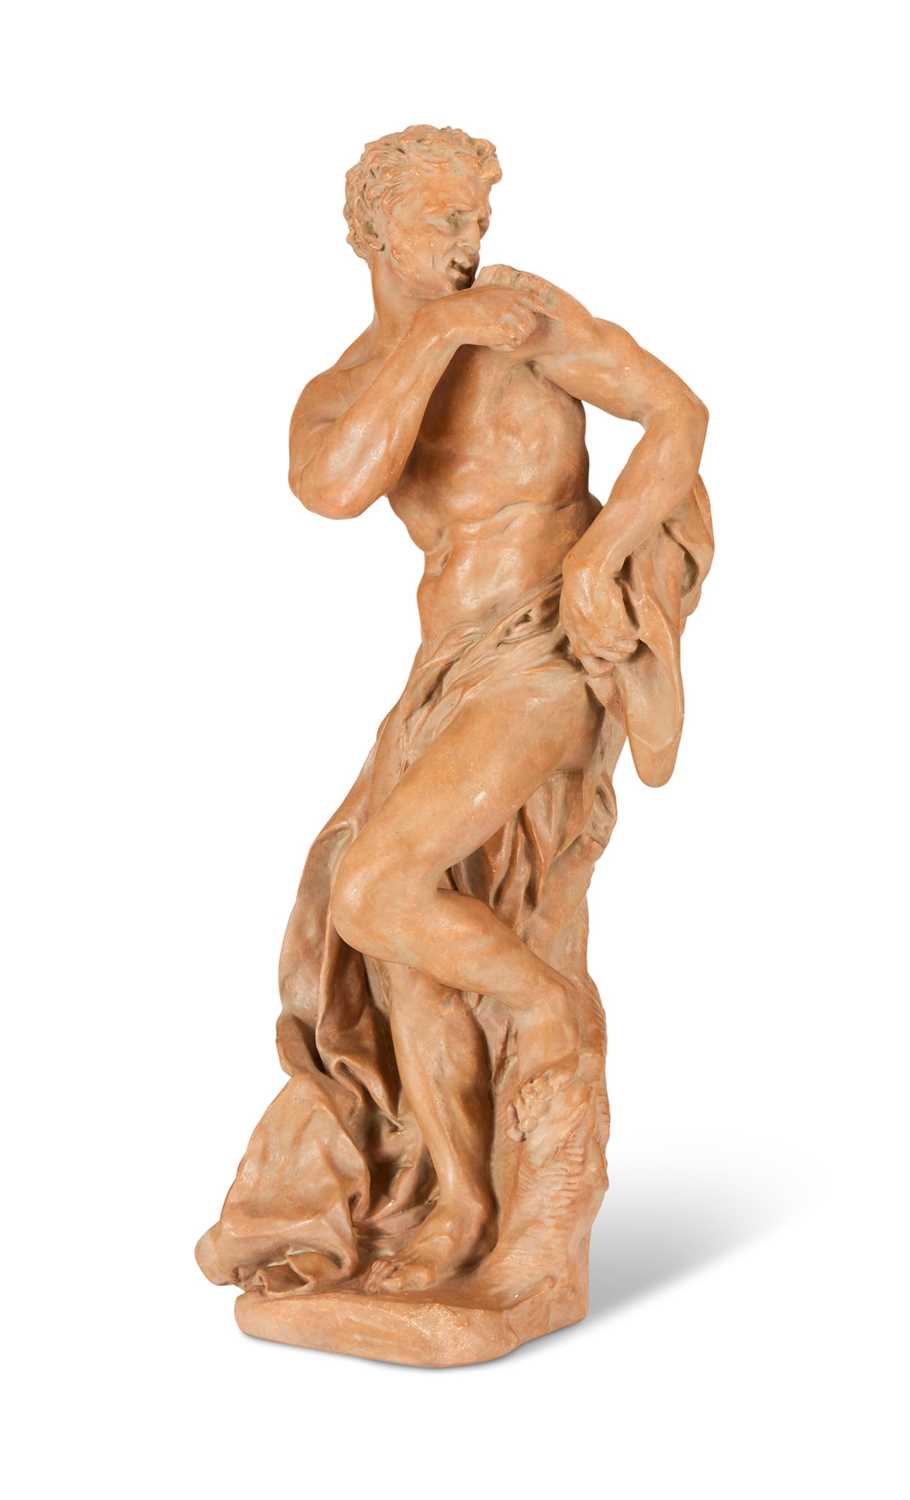 AFTER PIERRE PUGET (1620-1694): A PLASTER FIGURE OF LE FAUNE